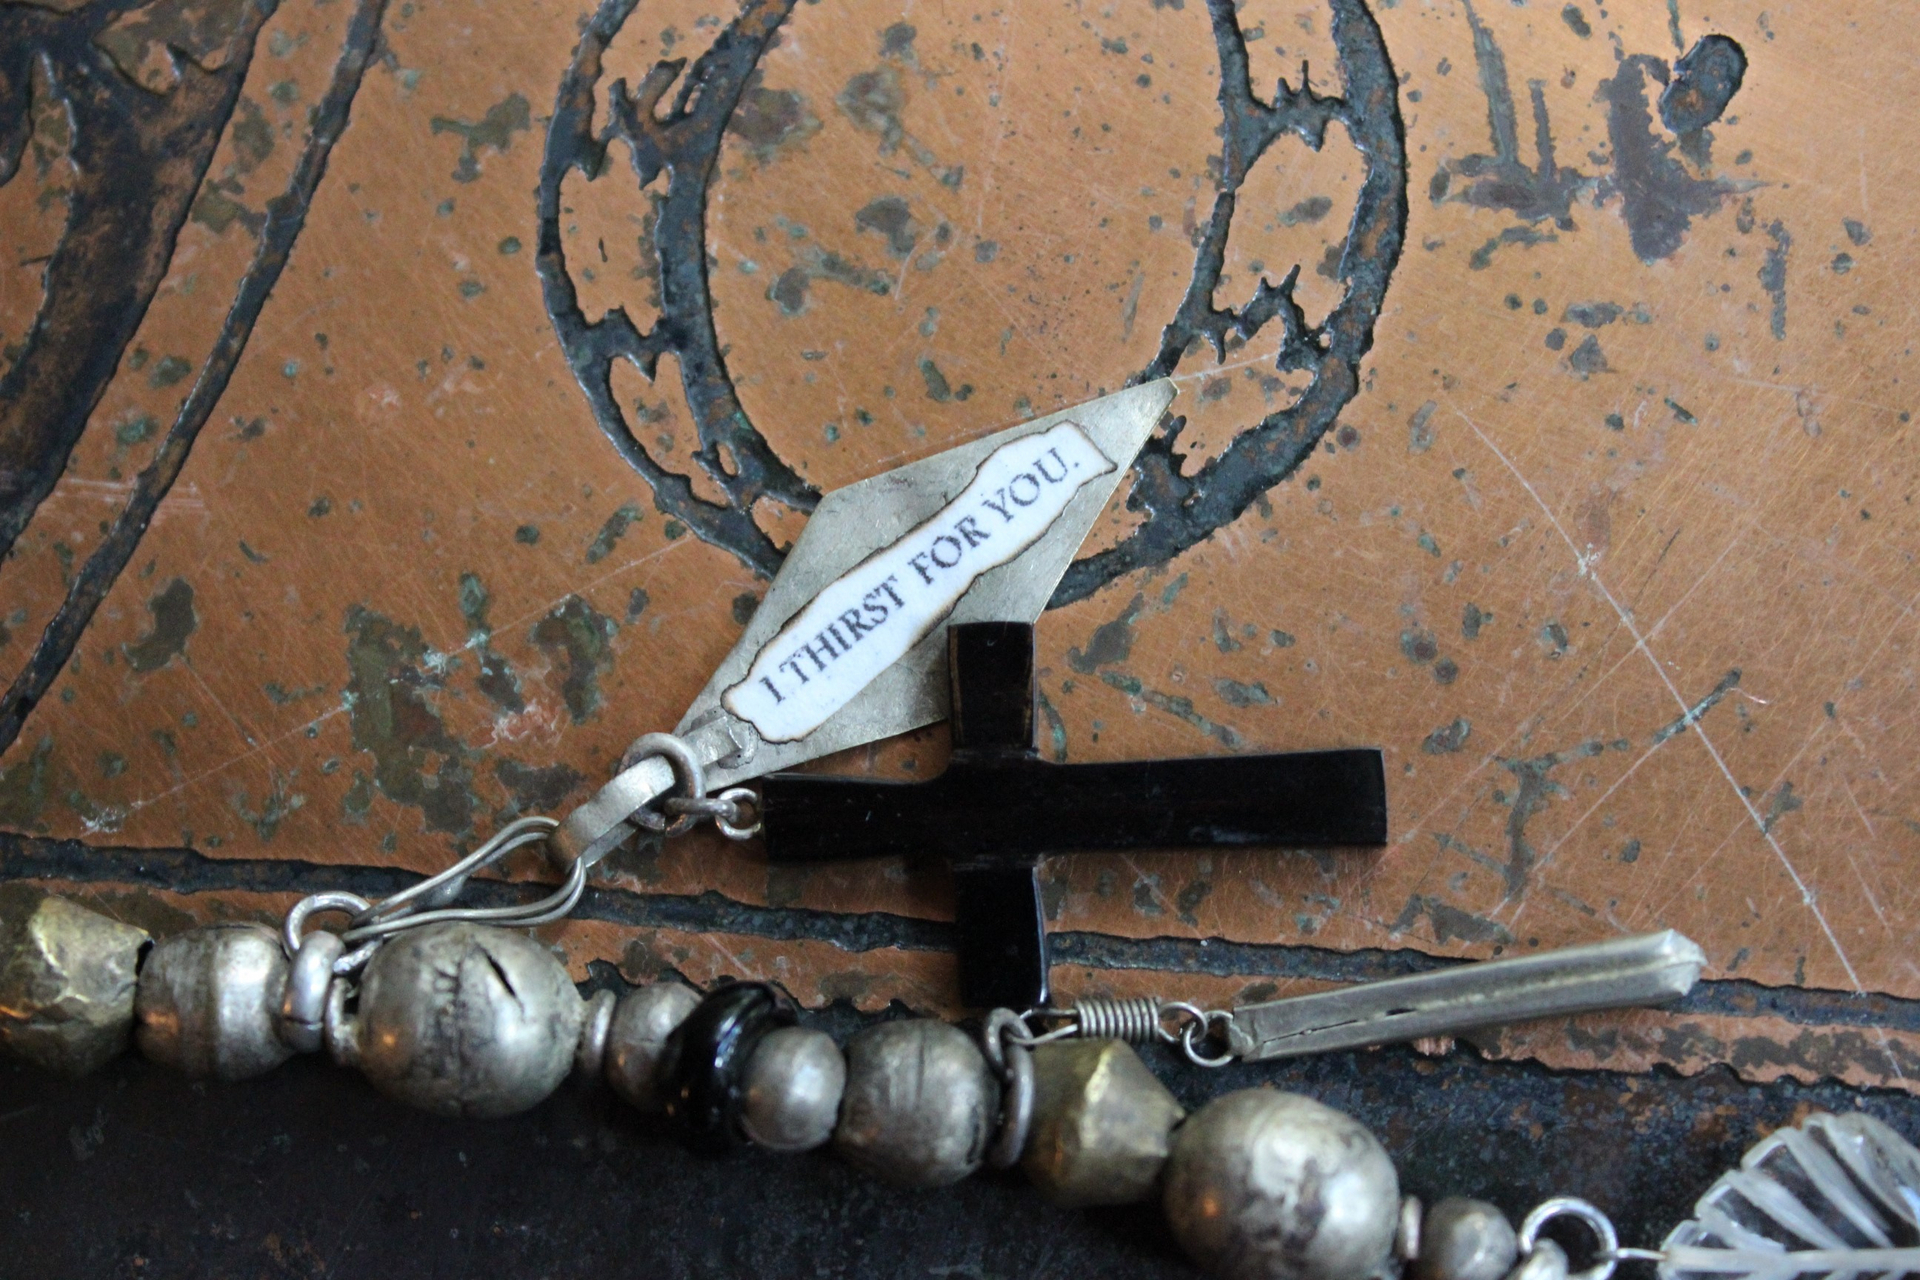 I Come Longing Necklace w/Antique Tribal Beads,Old Wood Findings with Mother Teresa "I THIRST" Text,Multiple Rock Quartz Drops,Antique Kuchi Findings & More!